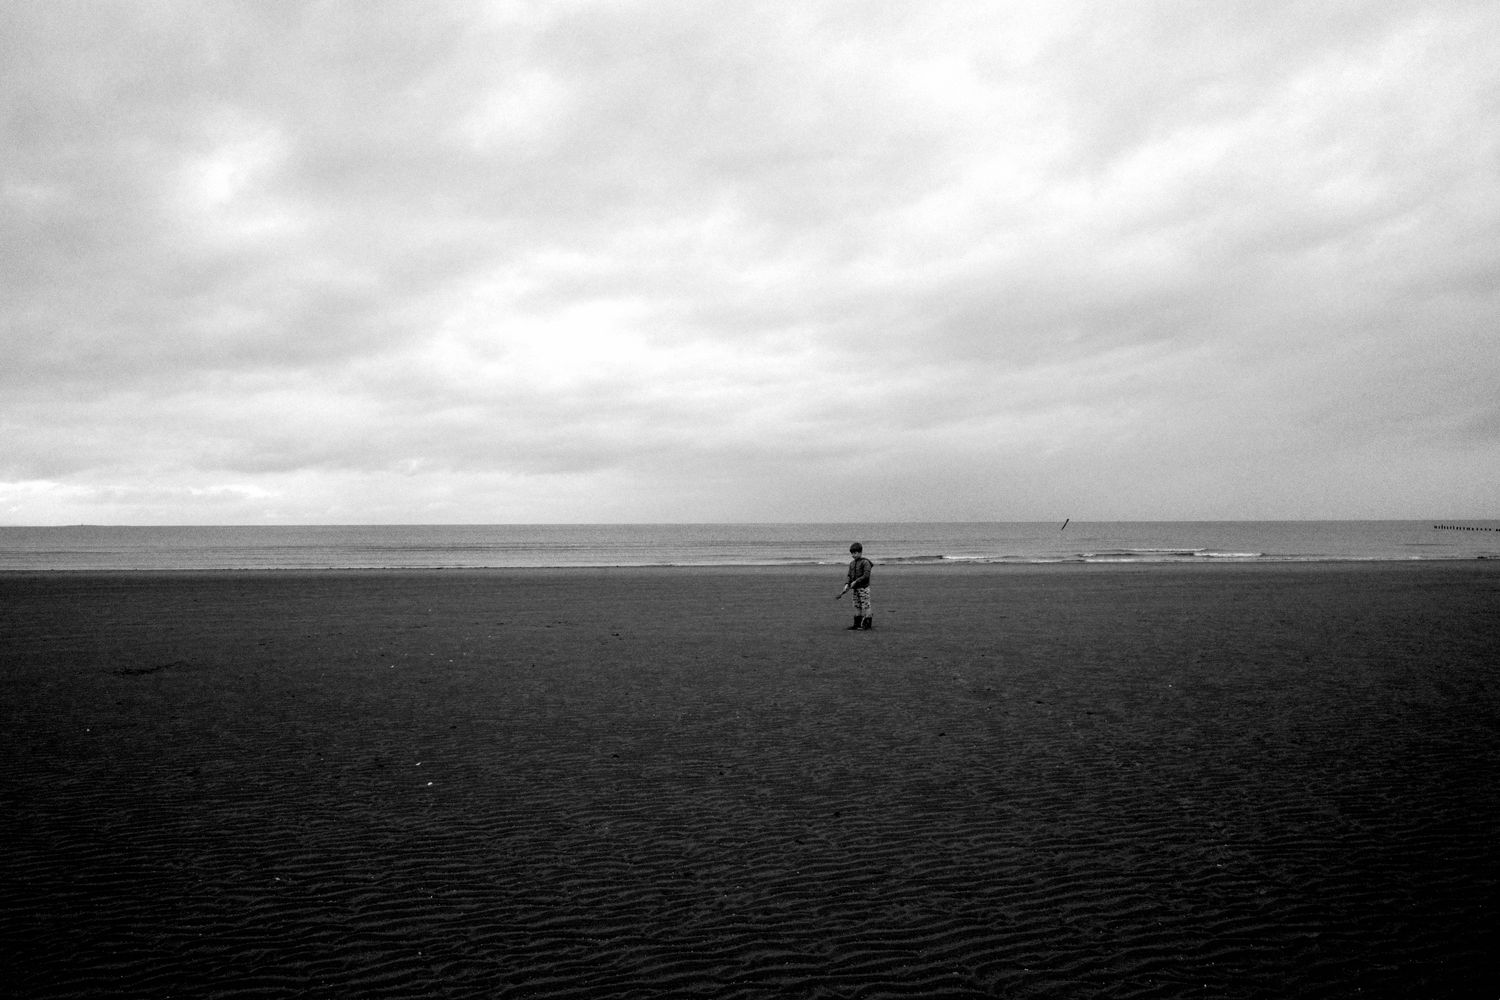 A boy standing on the beach in front of the sea